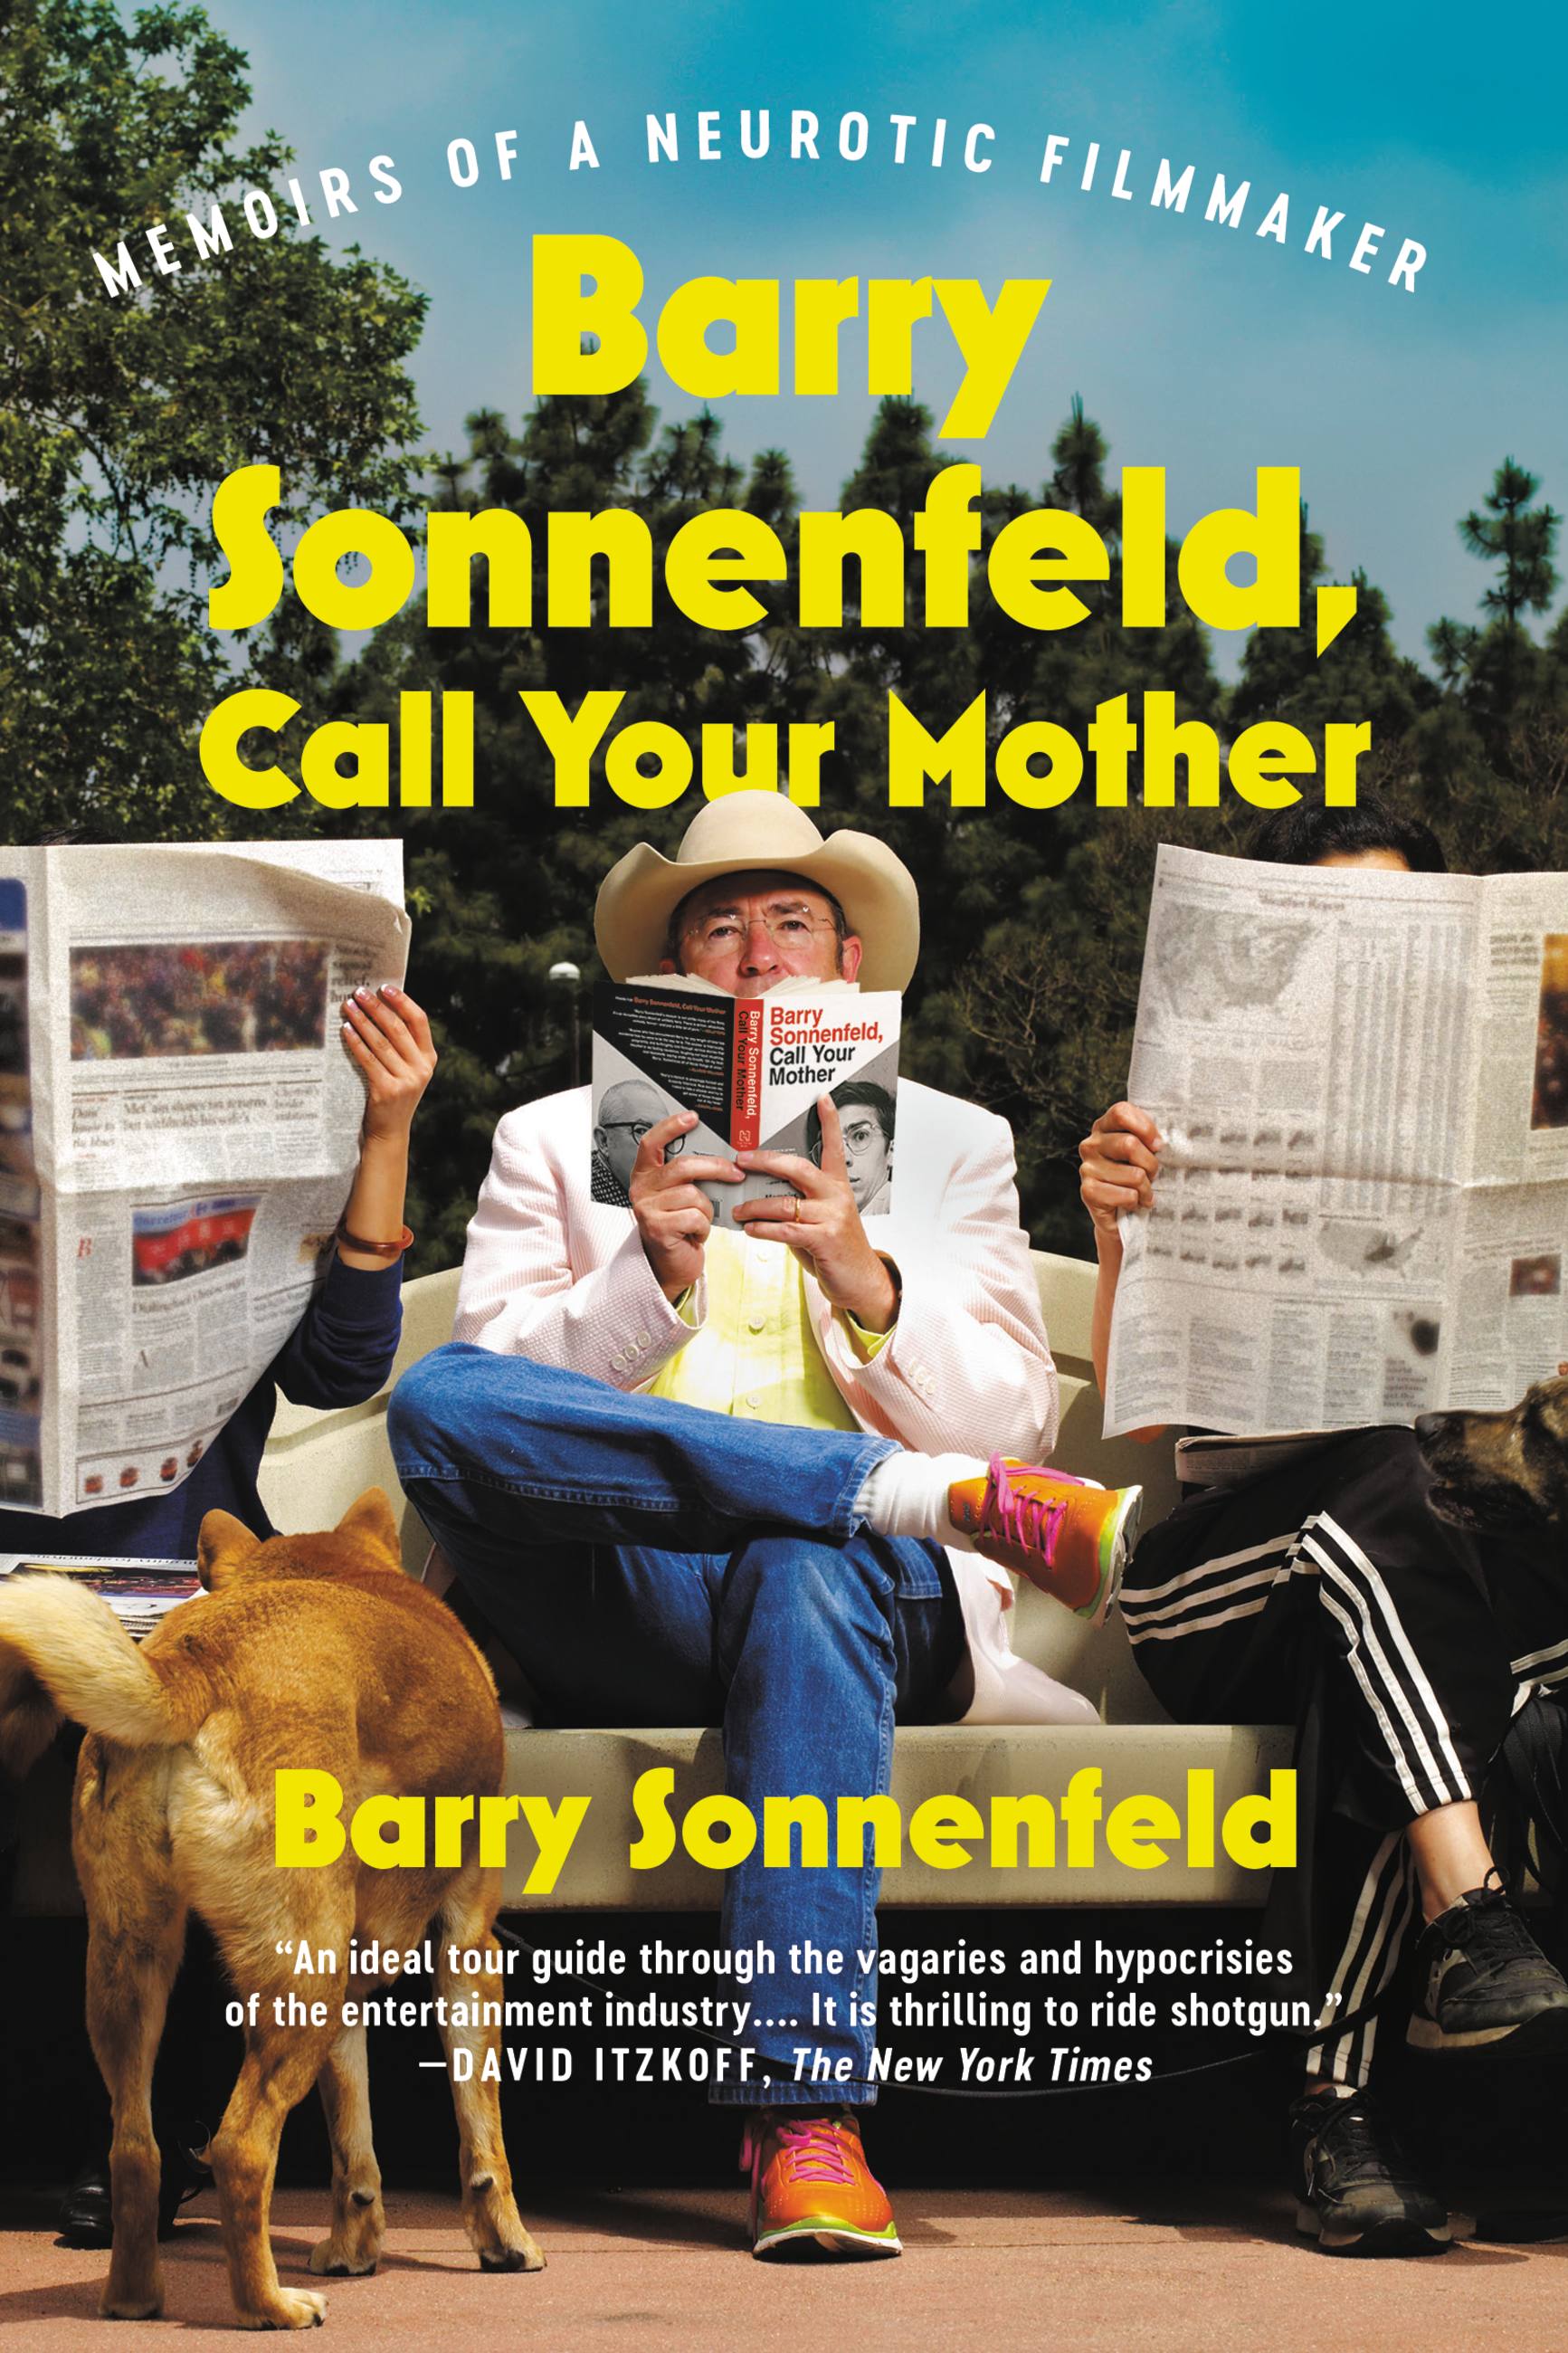 Barry Sonnenfeld, Call Your Mother by Barry Sonnenfeld | Hachette Book Group